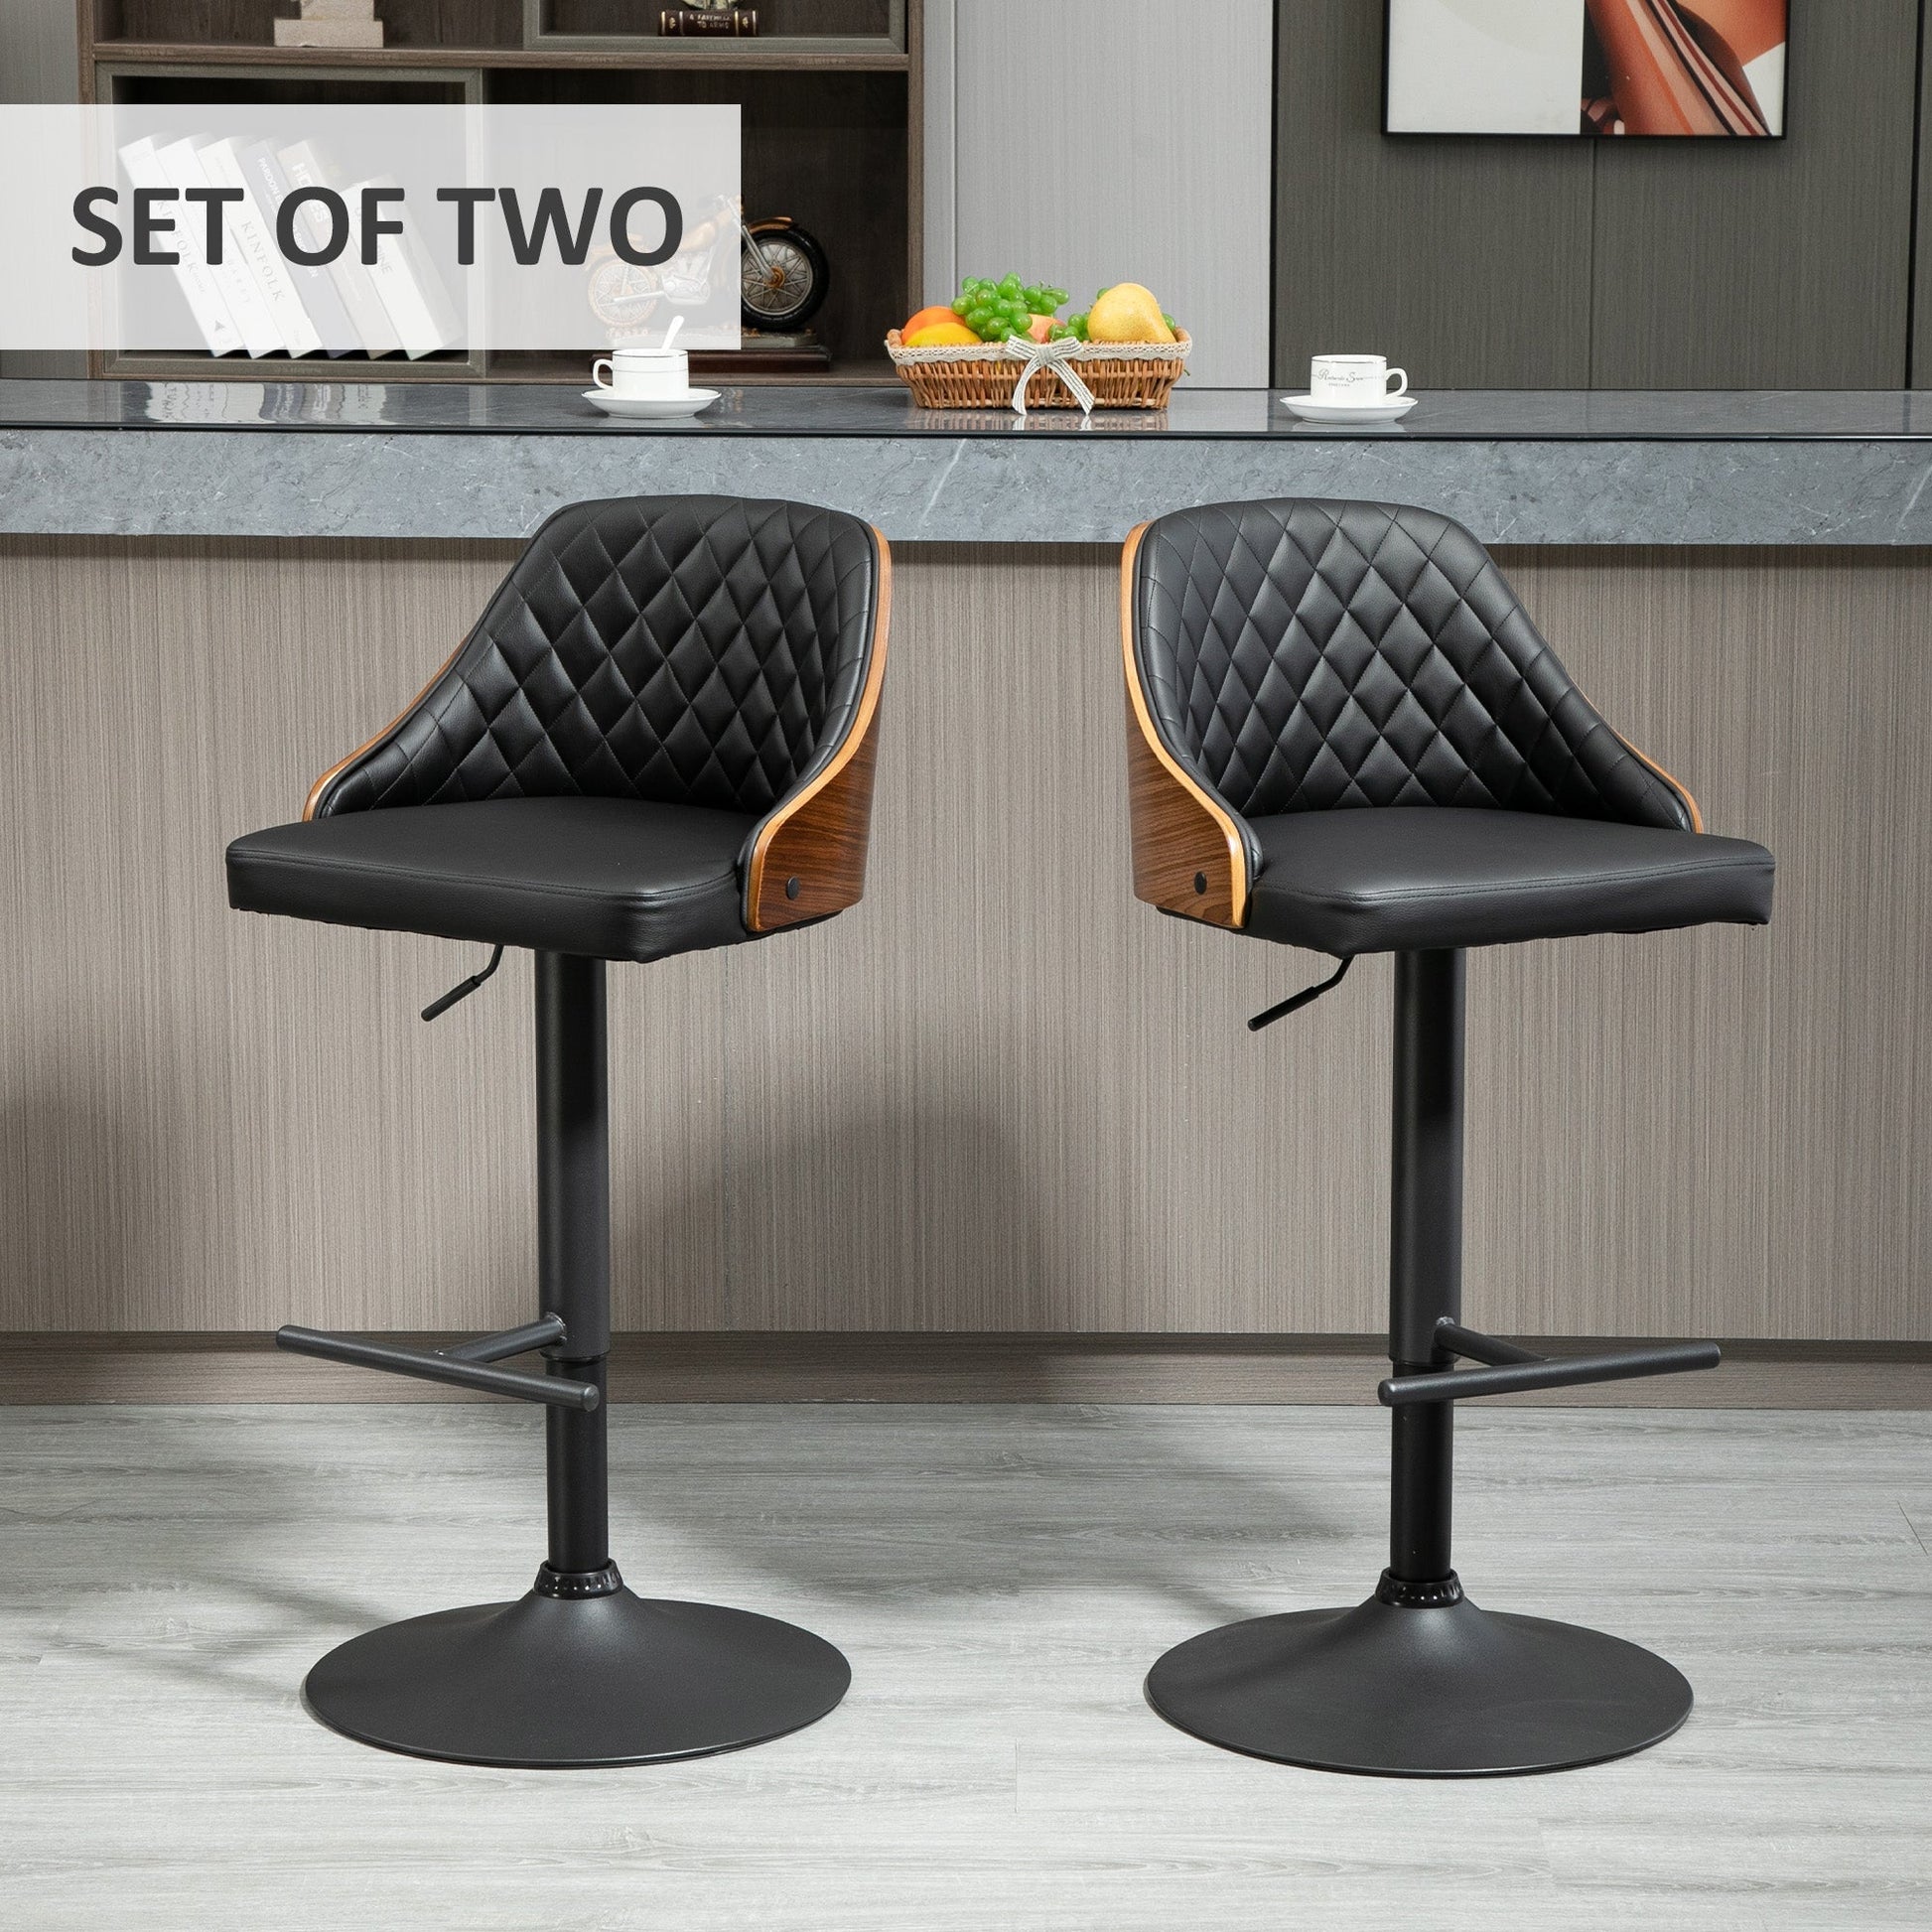 Modern Bar Stools PU Leather Set of 2 Swivel Bar Height Barstools Chairs with Adjustable Height, Round Heavy Metal Base and Footrest, Black - Gallery Canada